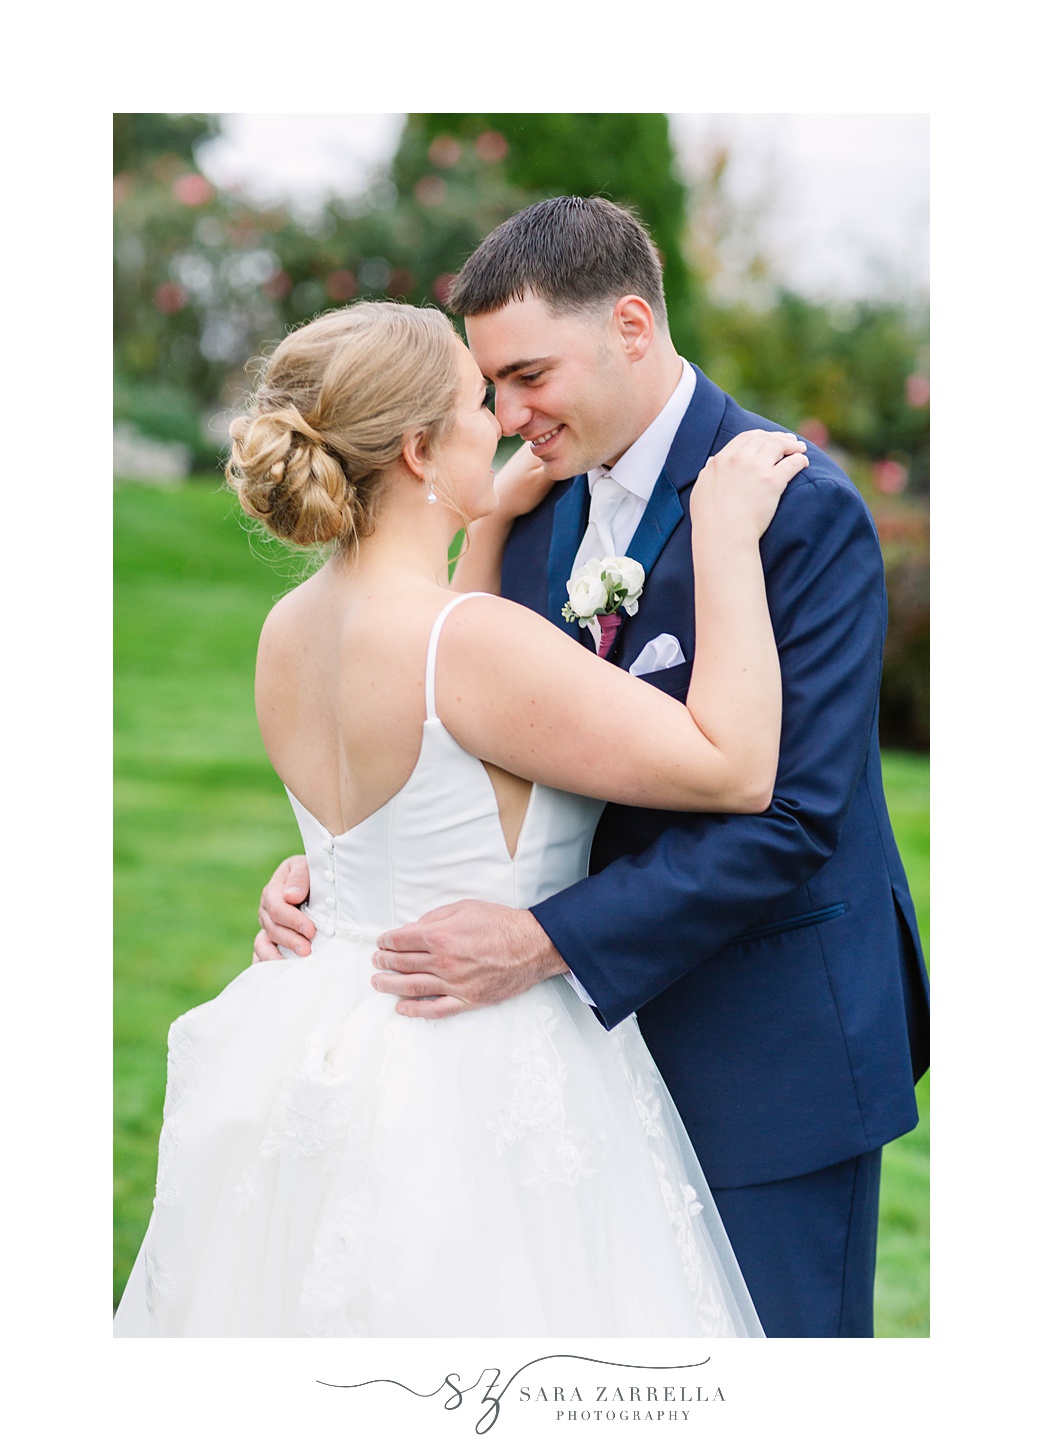 newlyweds dance during wedding portraits at Kirkbrae Country Club